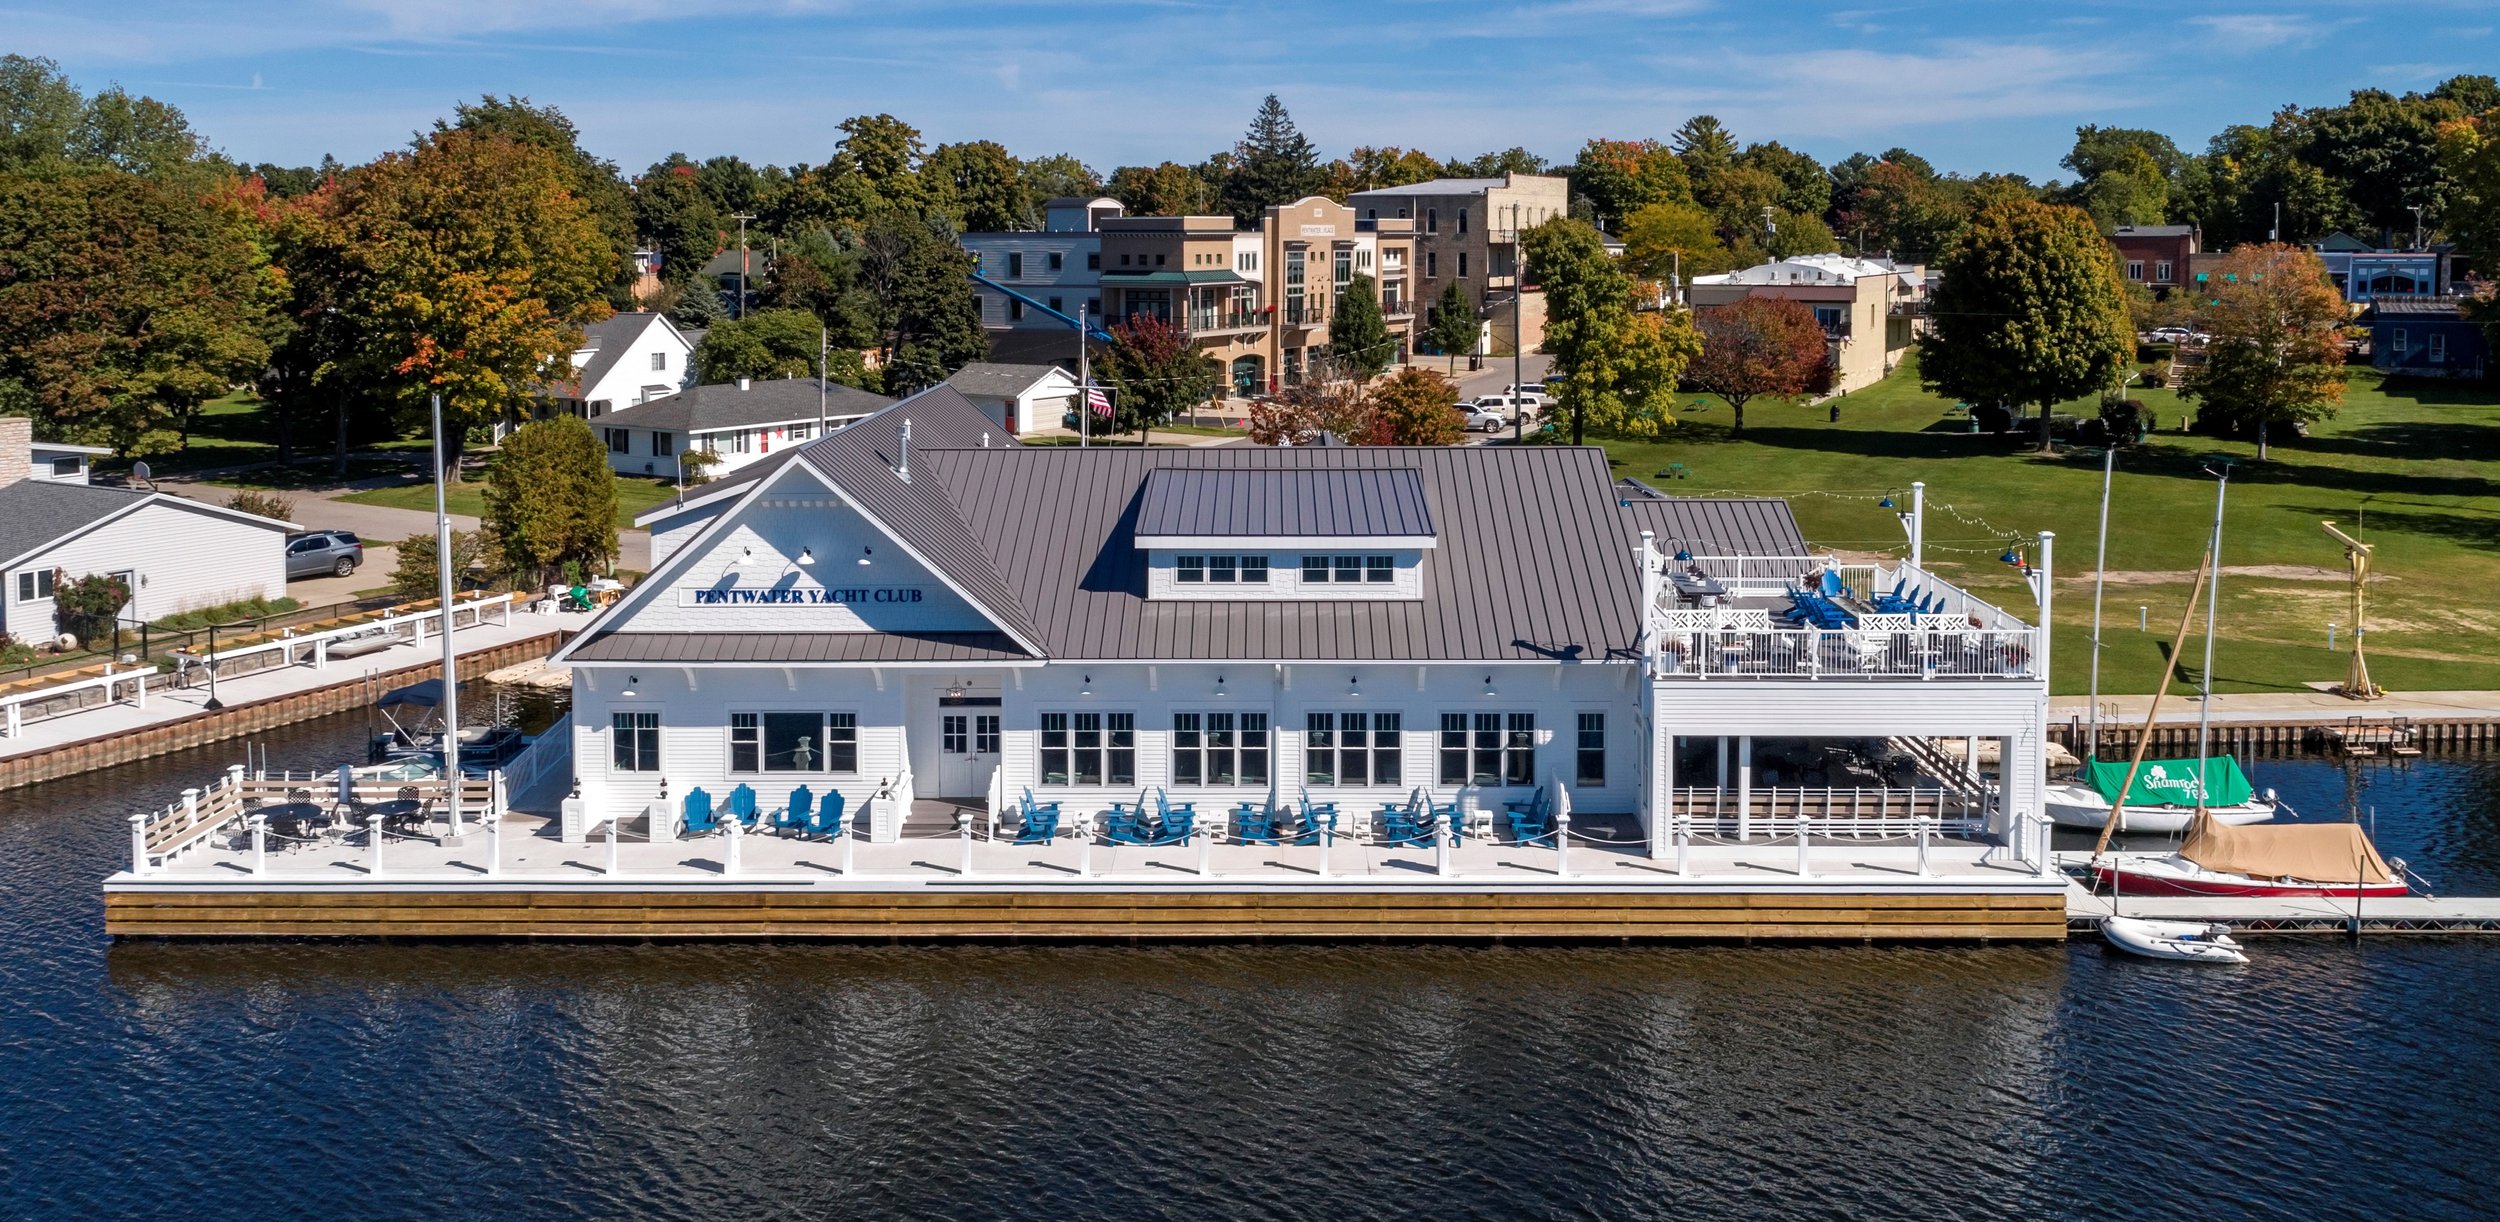 pentwater yacht club reservations